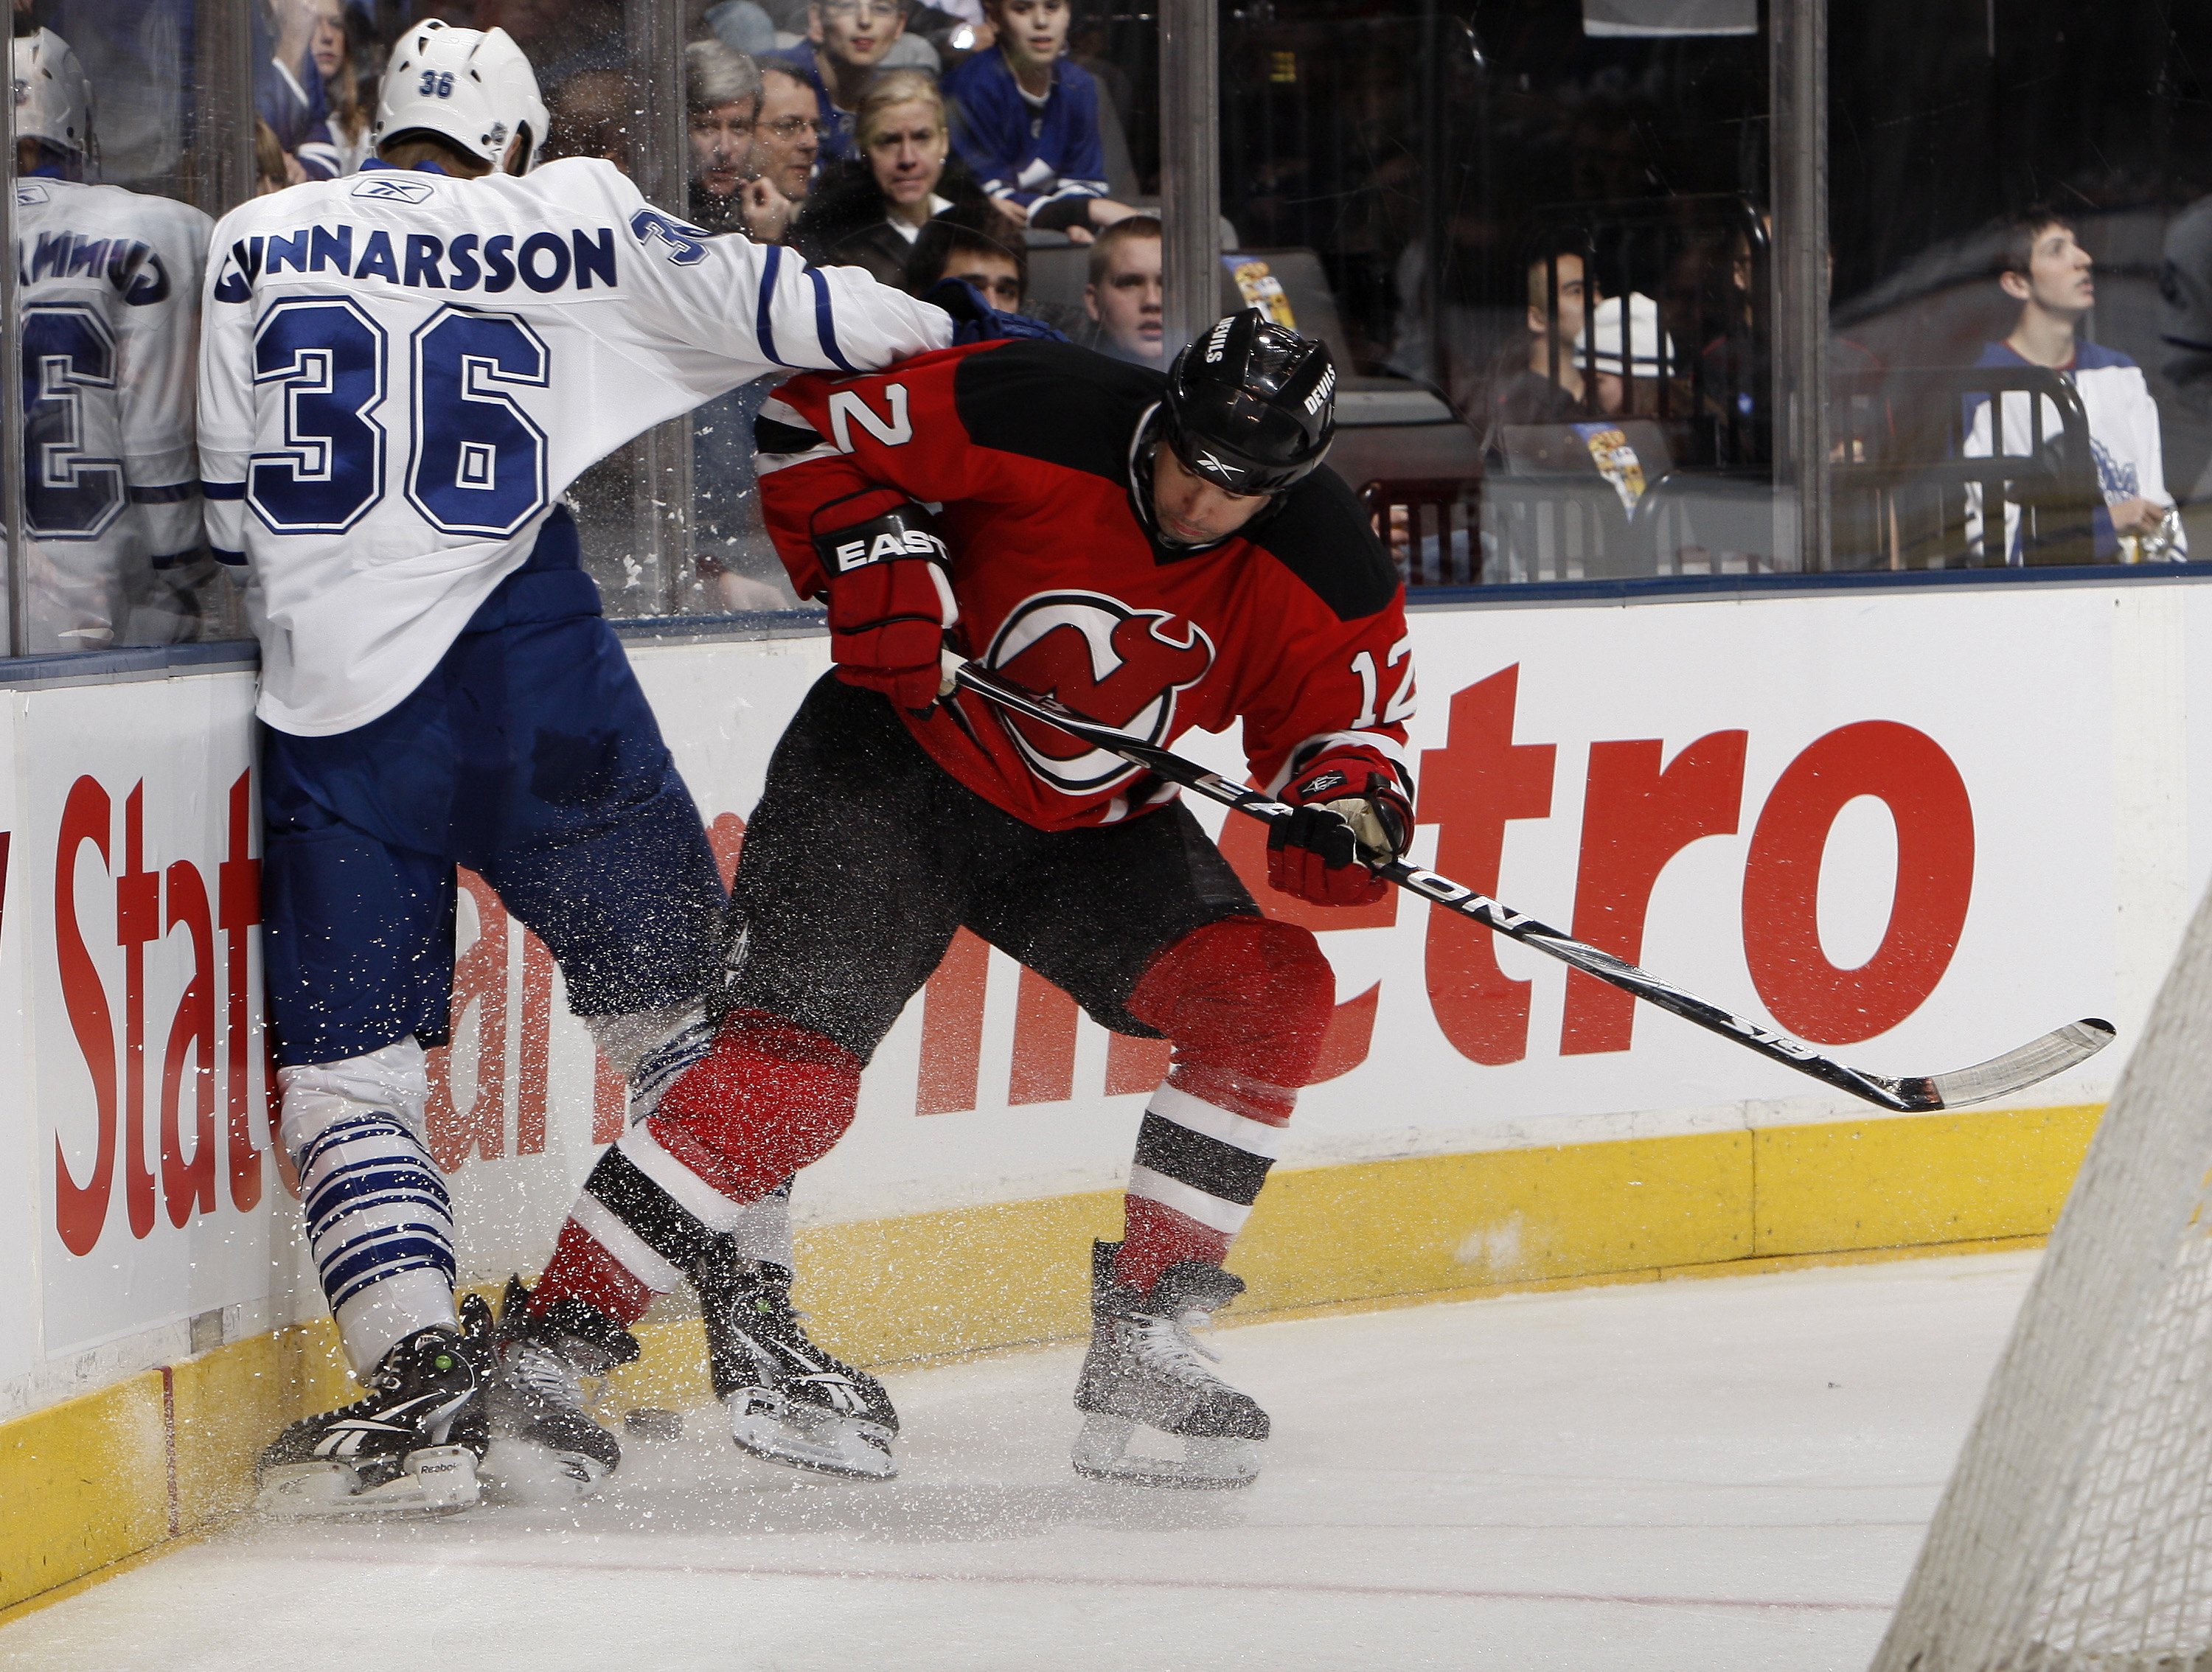 TORONTO - FEBRUARY 2: Carl Gunnarsson #36 of the Toronto Maple Leafs runs into Brian Rolston #12 of the New Jersey Devils during game action on February 2, 2010 at the Air Canada Centre in Toronto, Ontario, Canada. (Photo by Abelimages/Getty Images)